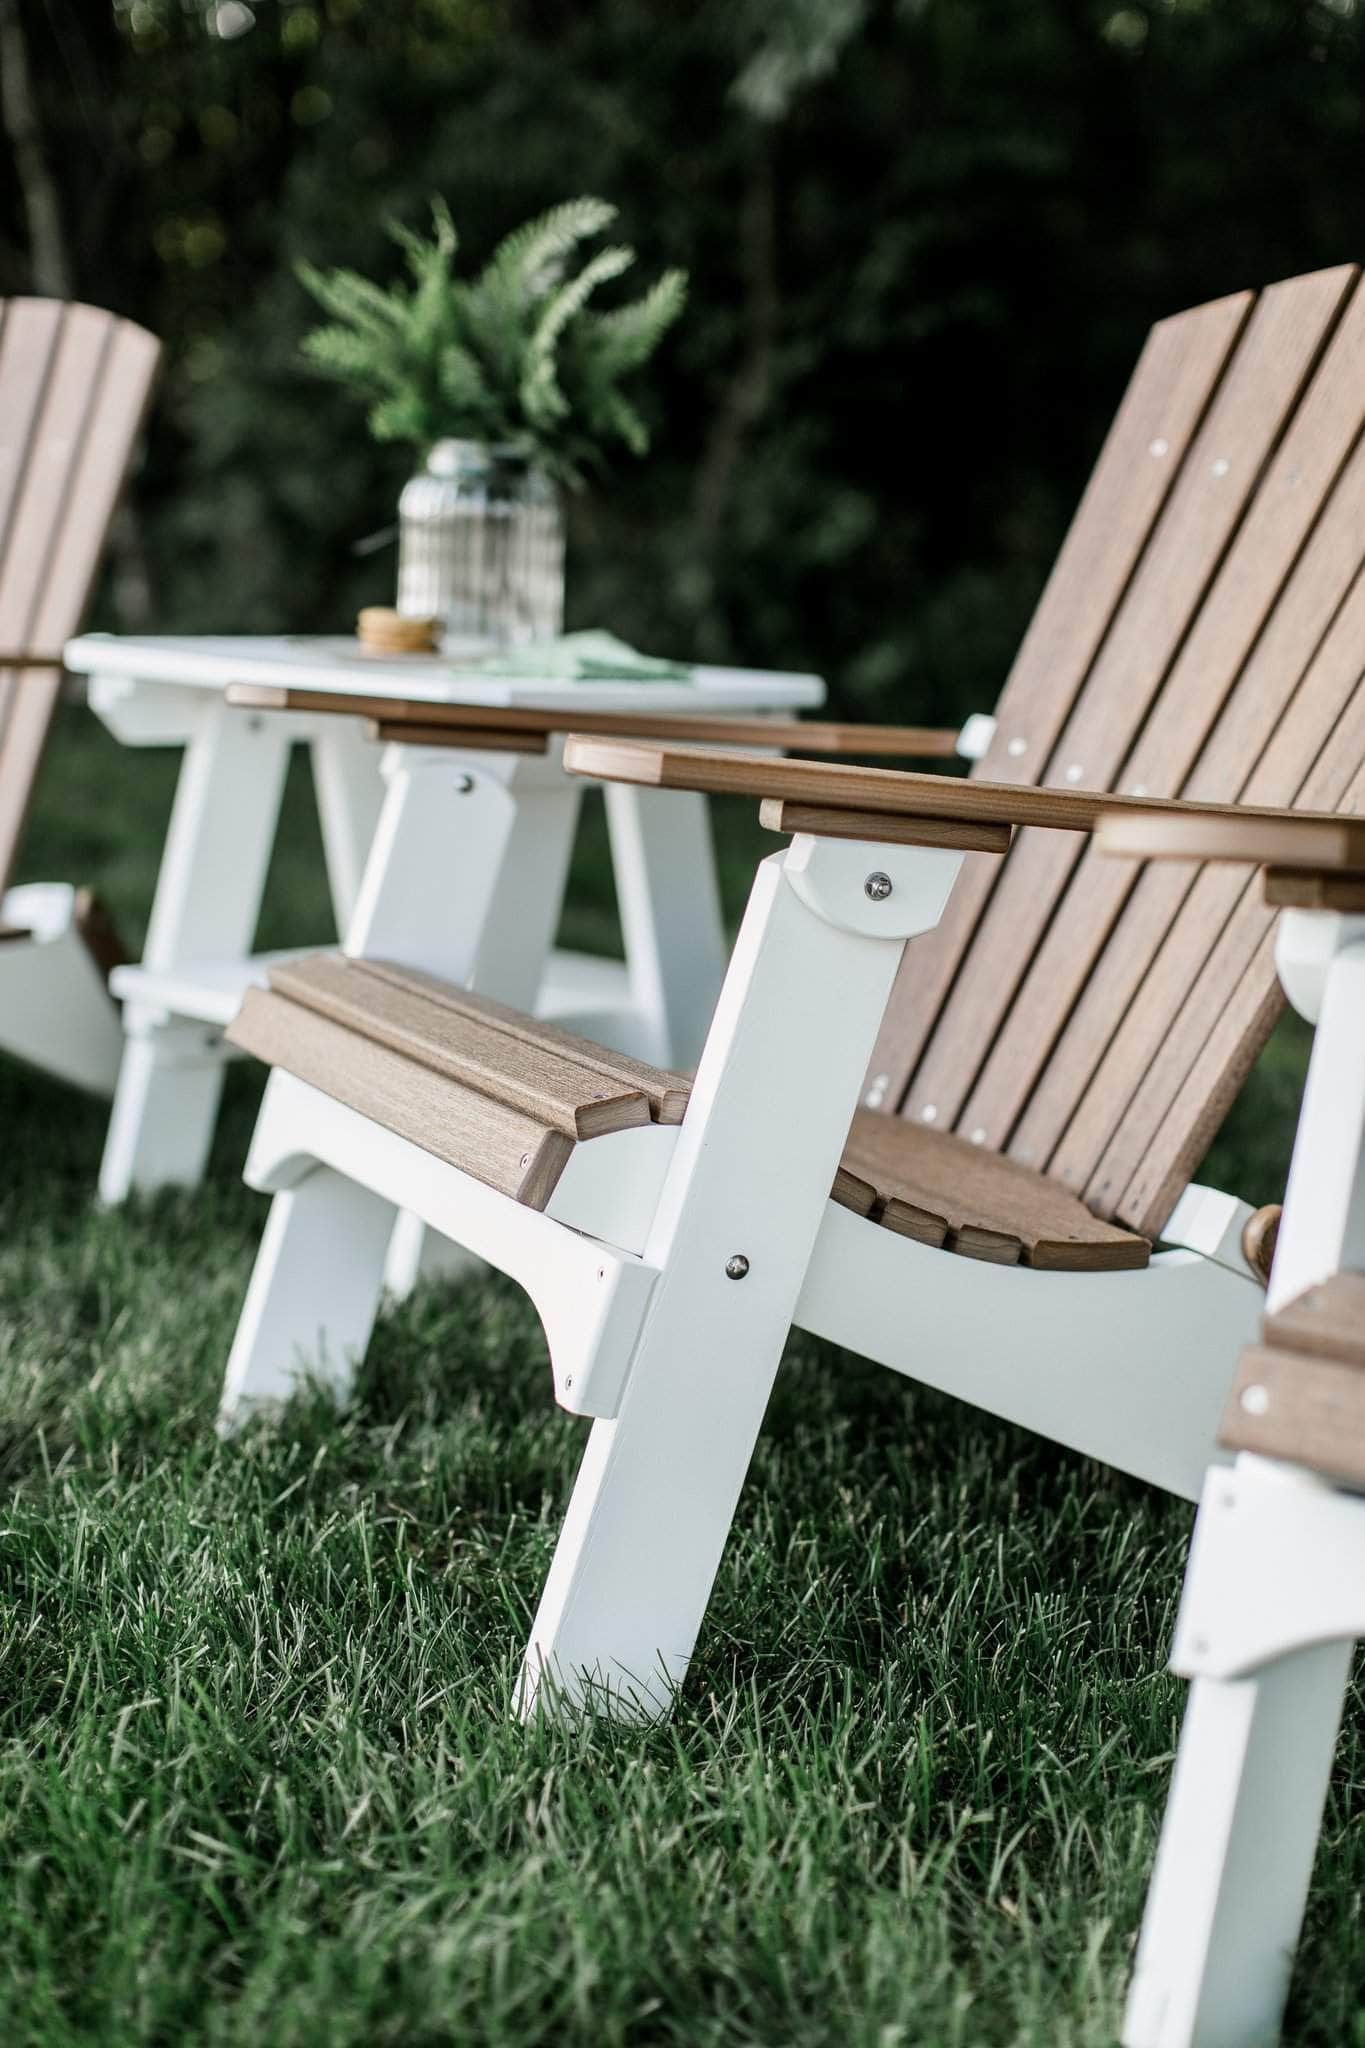 Adirondack Chairs: Classic Outdoor Seating for Relaxation